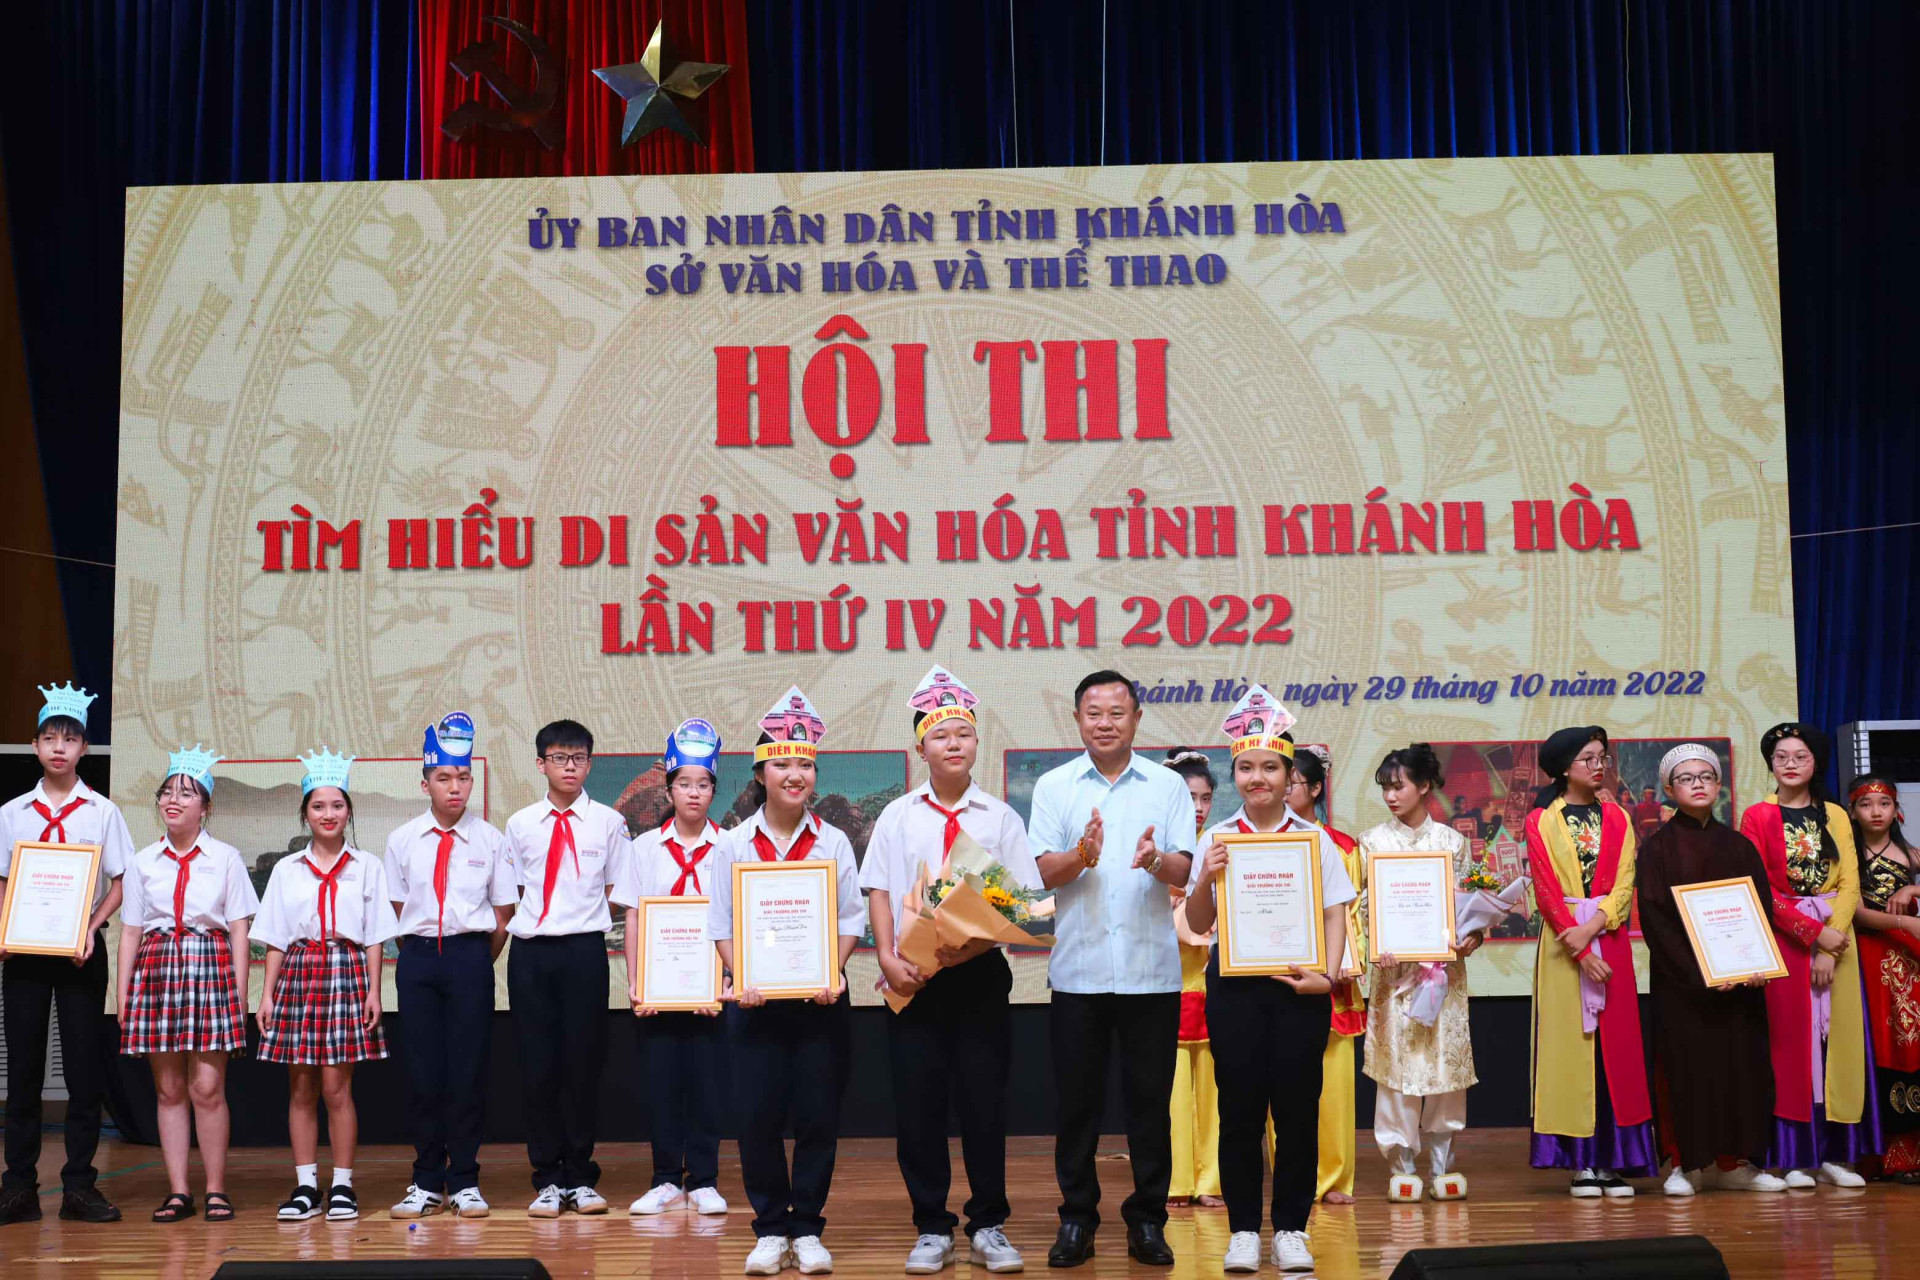 Leader of Khanh Hoa Provincial Department of Culture and Sports giving the first prize Dien Khanh’s school